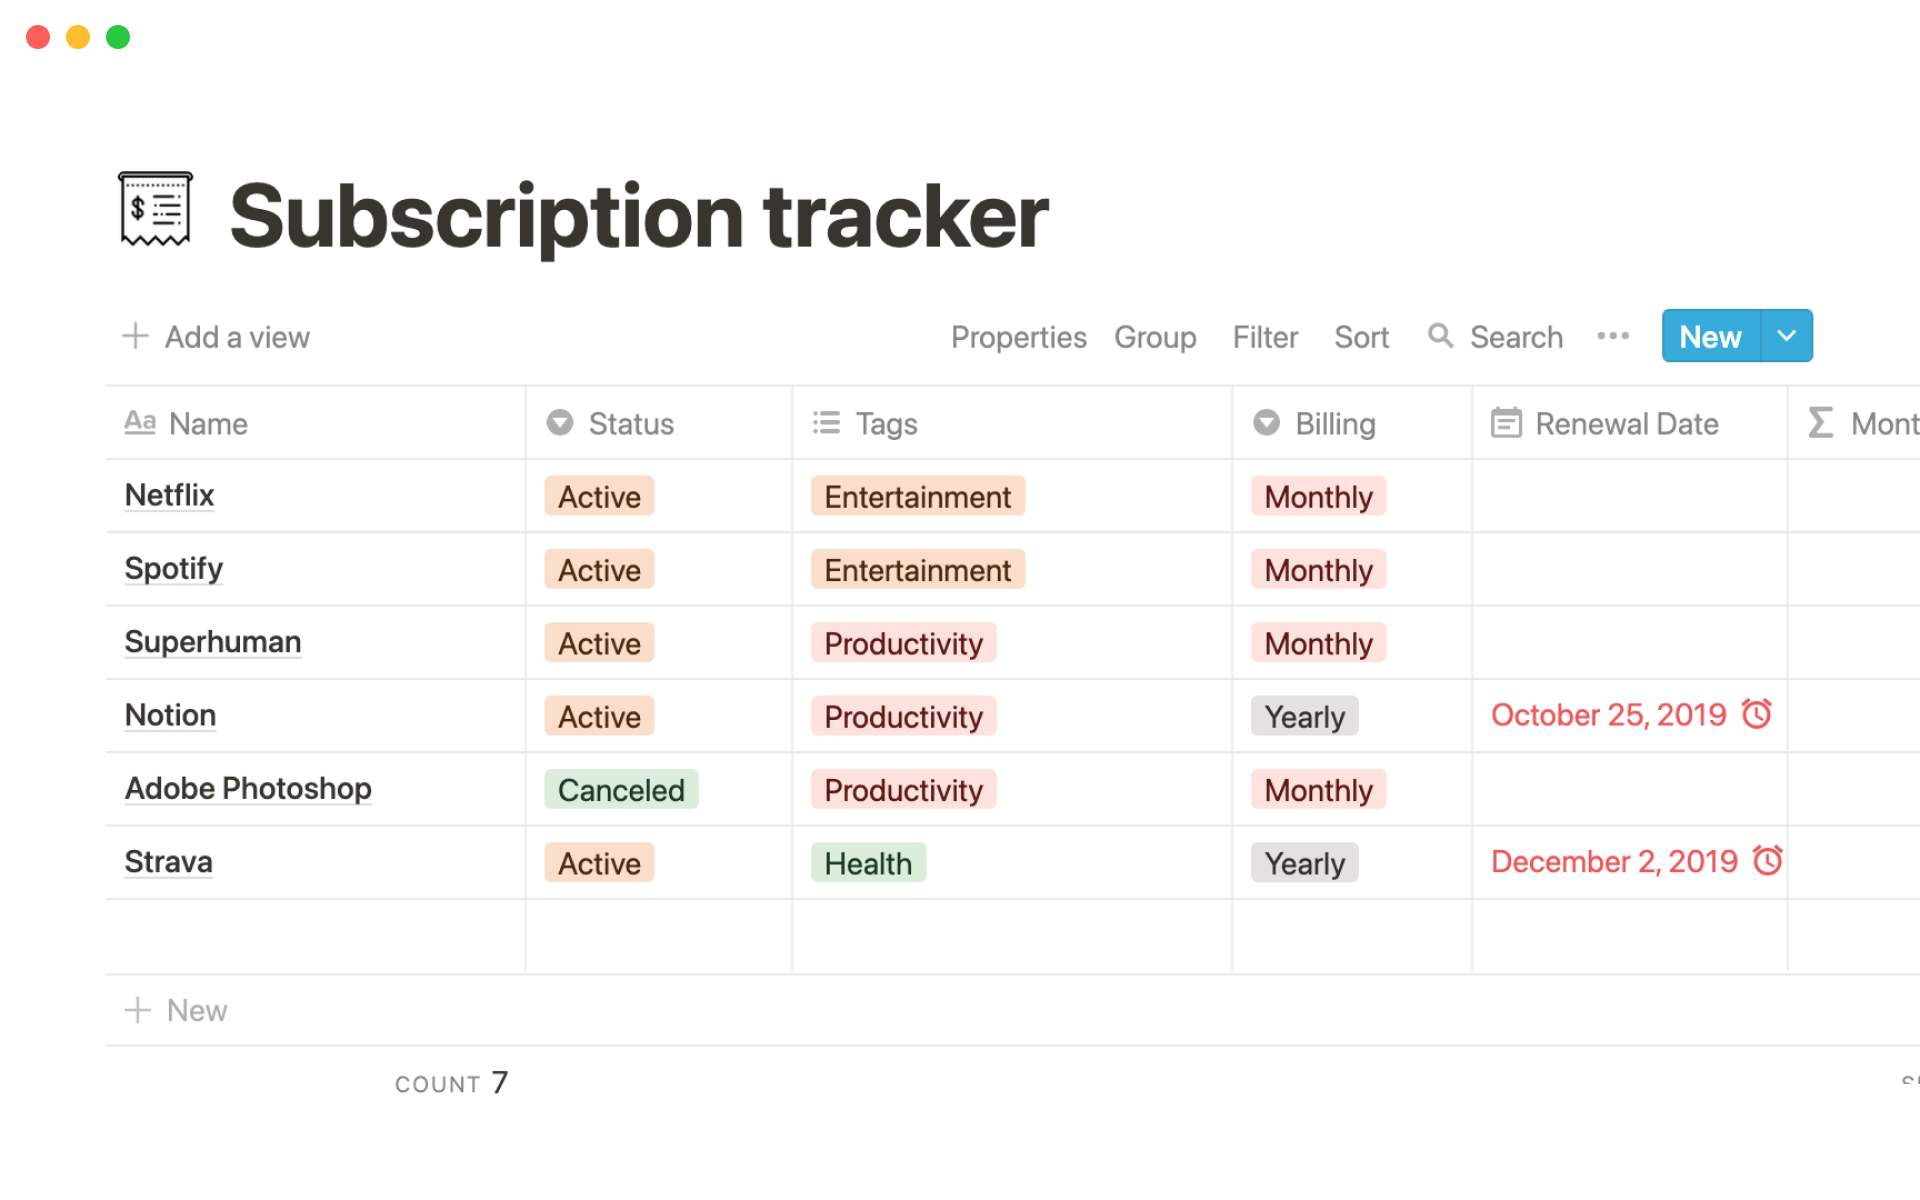 The desktop image for the Subscription tracker template